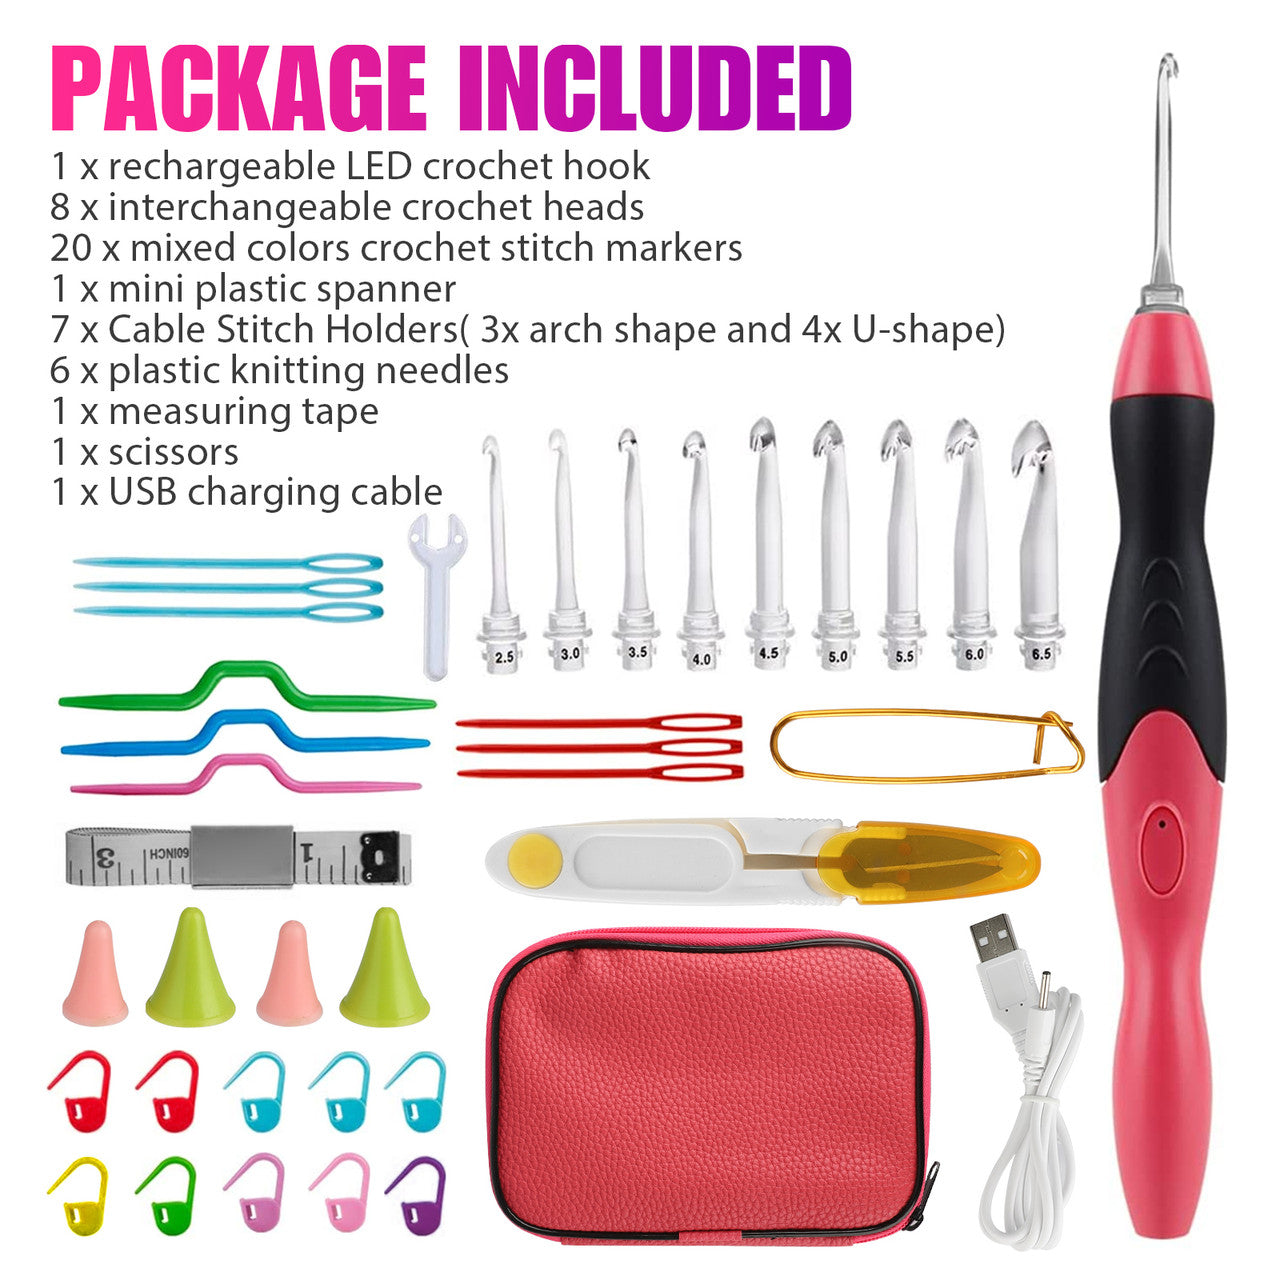 LED Rechargeable Crochet Hook Kit with Case, Interchangeable Heads Knitting Needles, 46pcs